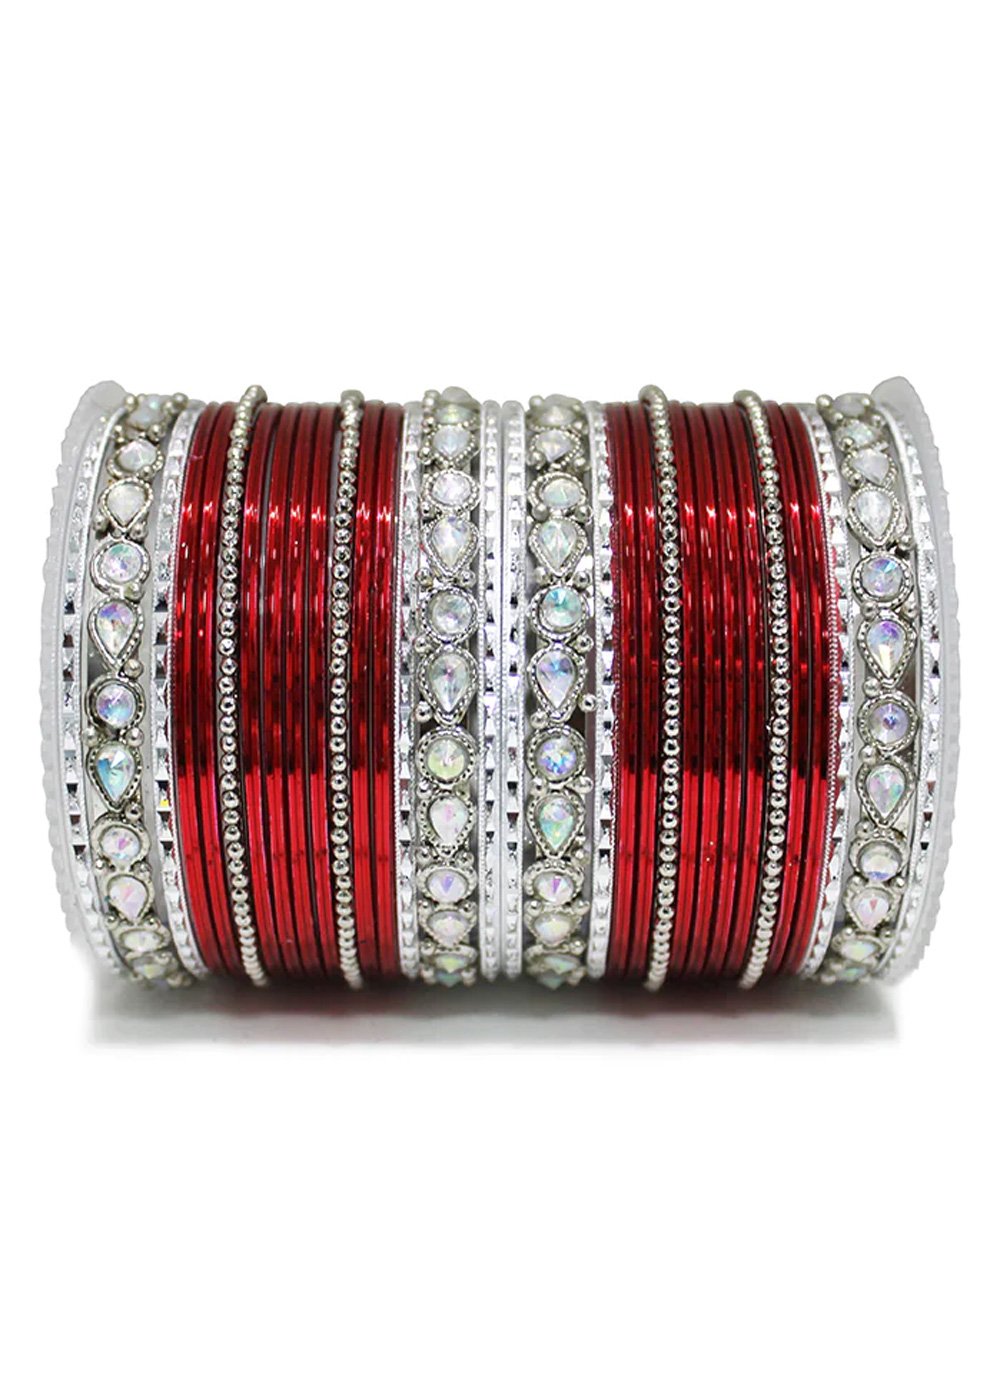 Catchy Stone Work Alloy Bangles For Festival